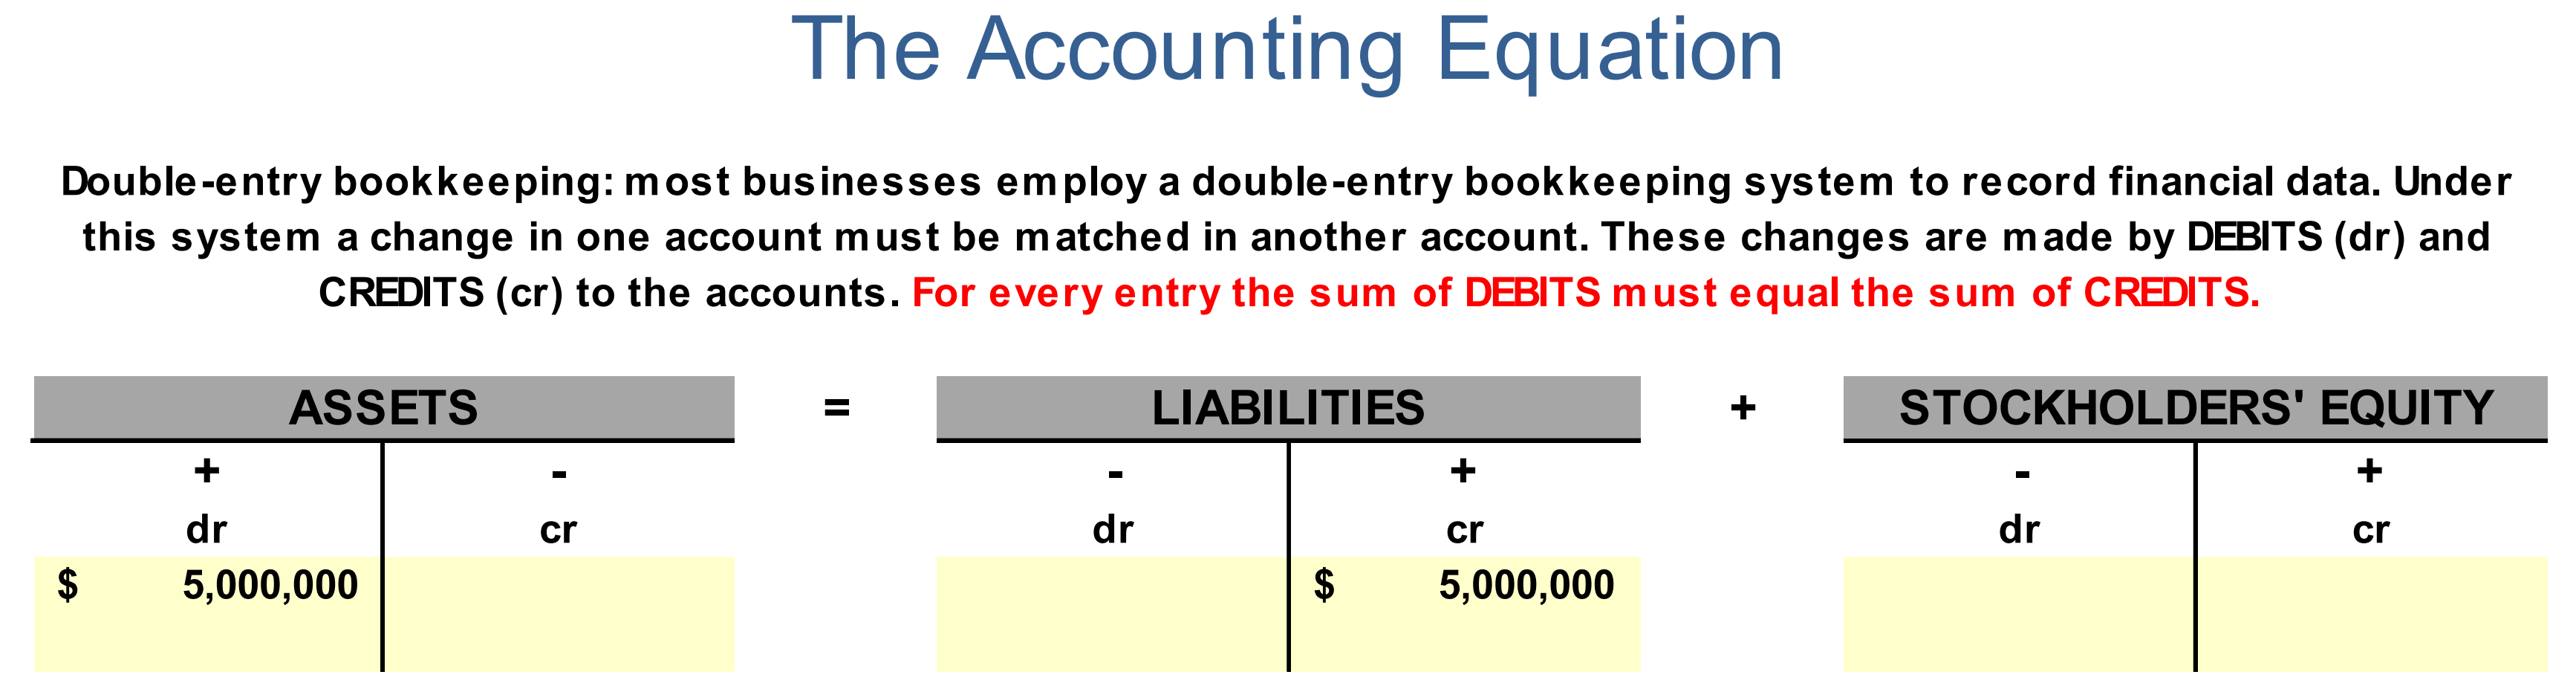 The Accounting Equation Example with Debit and Credit